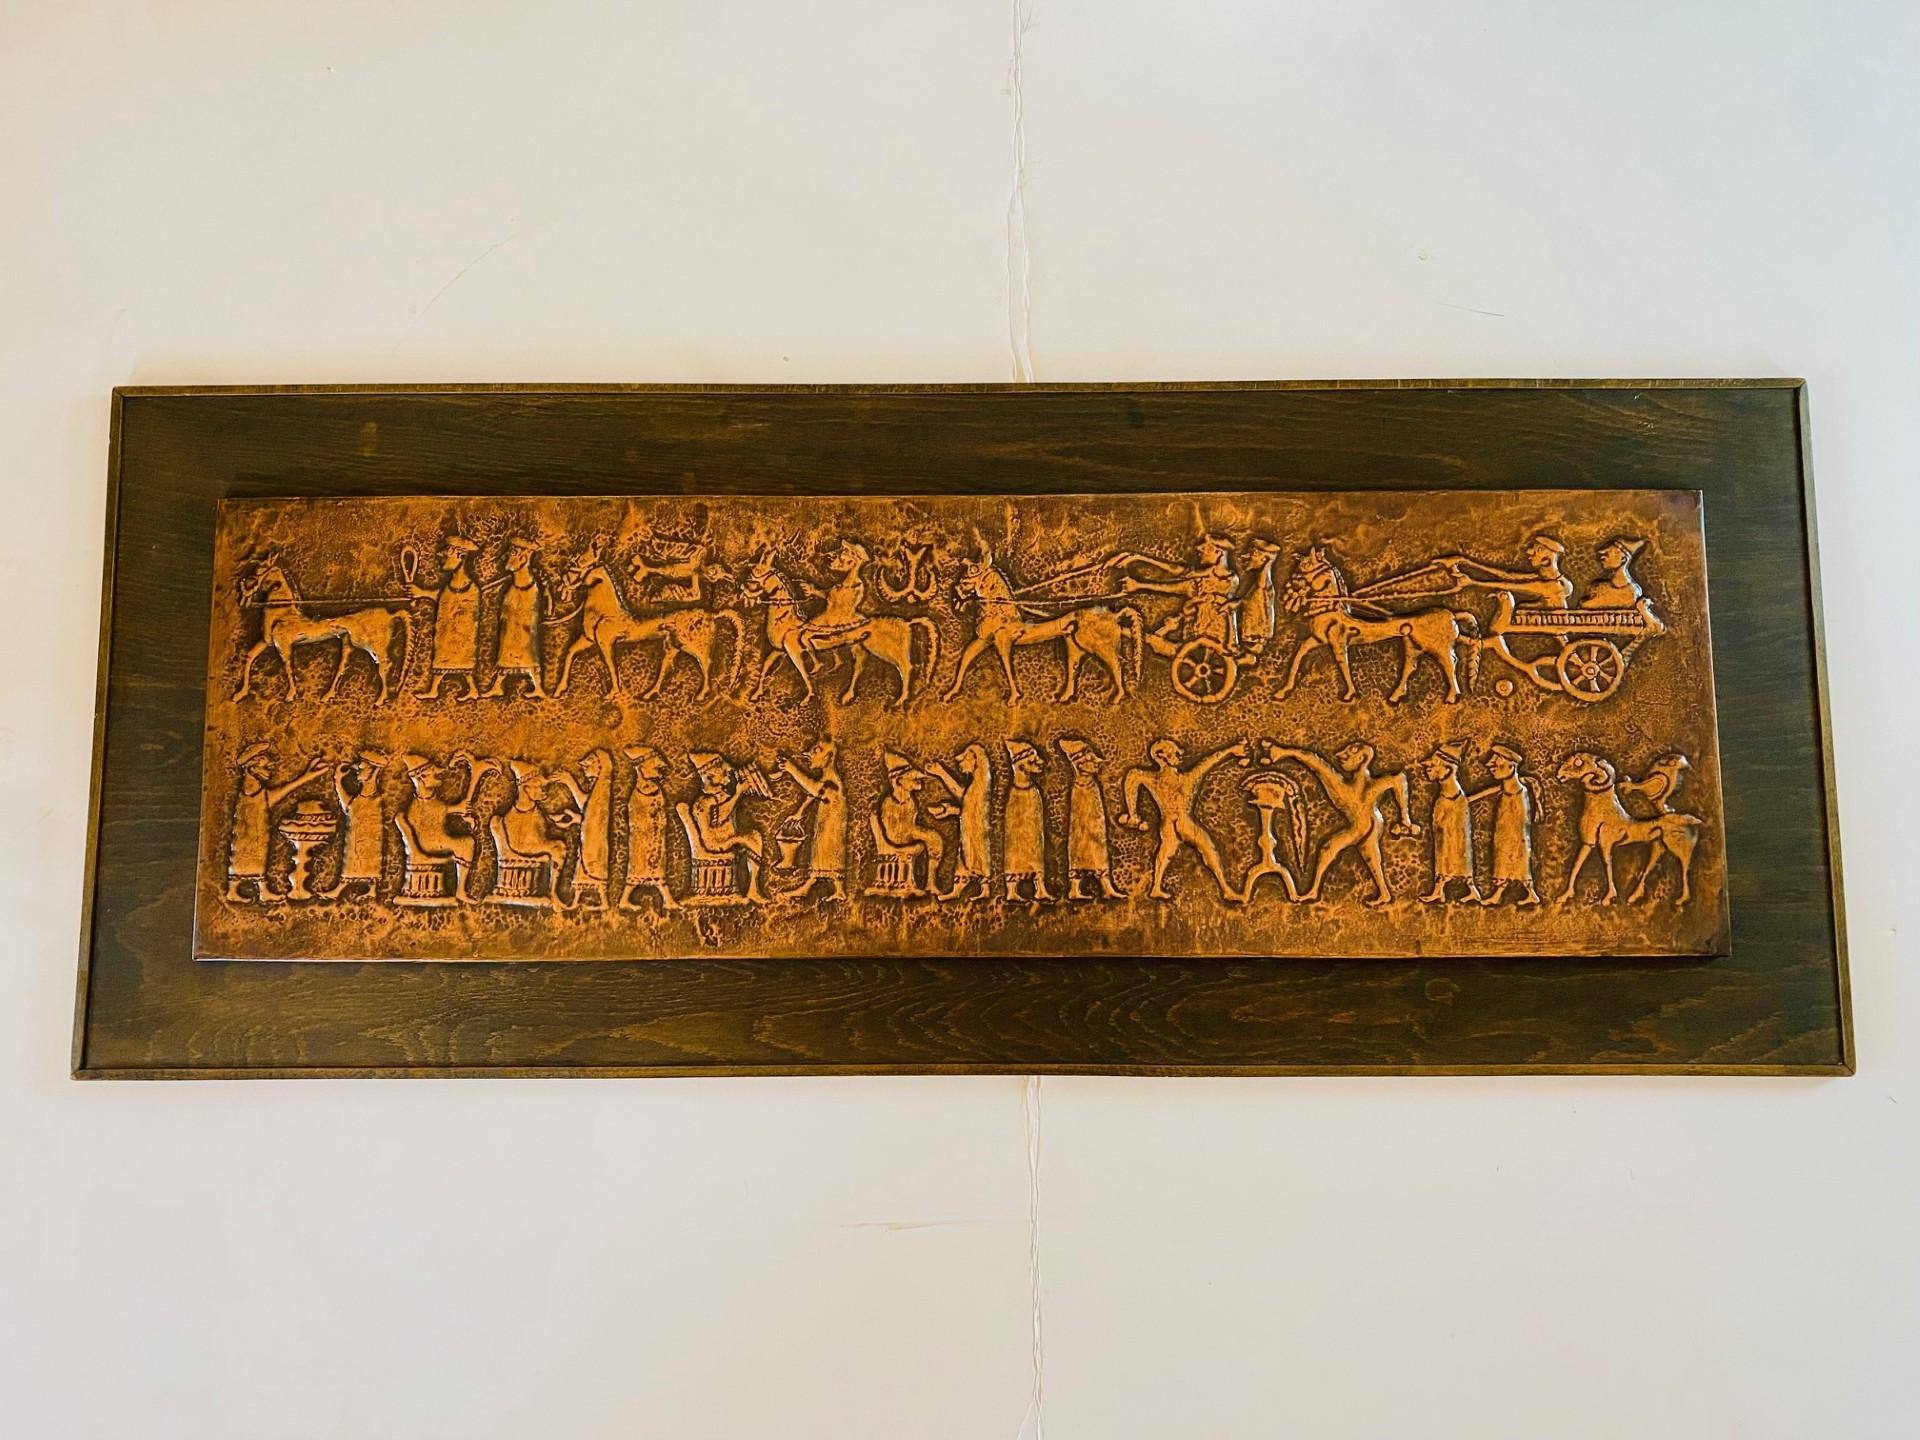 Incredible Mid Century bronze representation casing scene of the Balawat gate, which hails from Balawat (also known as Imgur-Enlil) in northern Mesopotamia, Iraq, and dates back to the Neo-Assyrian Period during the reign of King Shalmaneser III